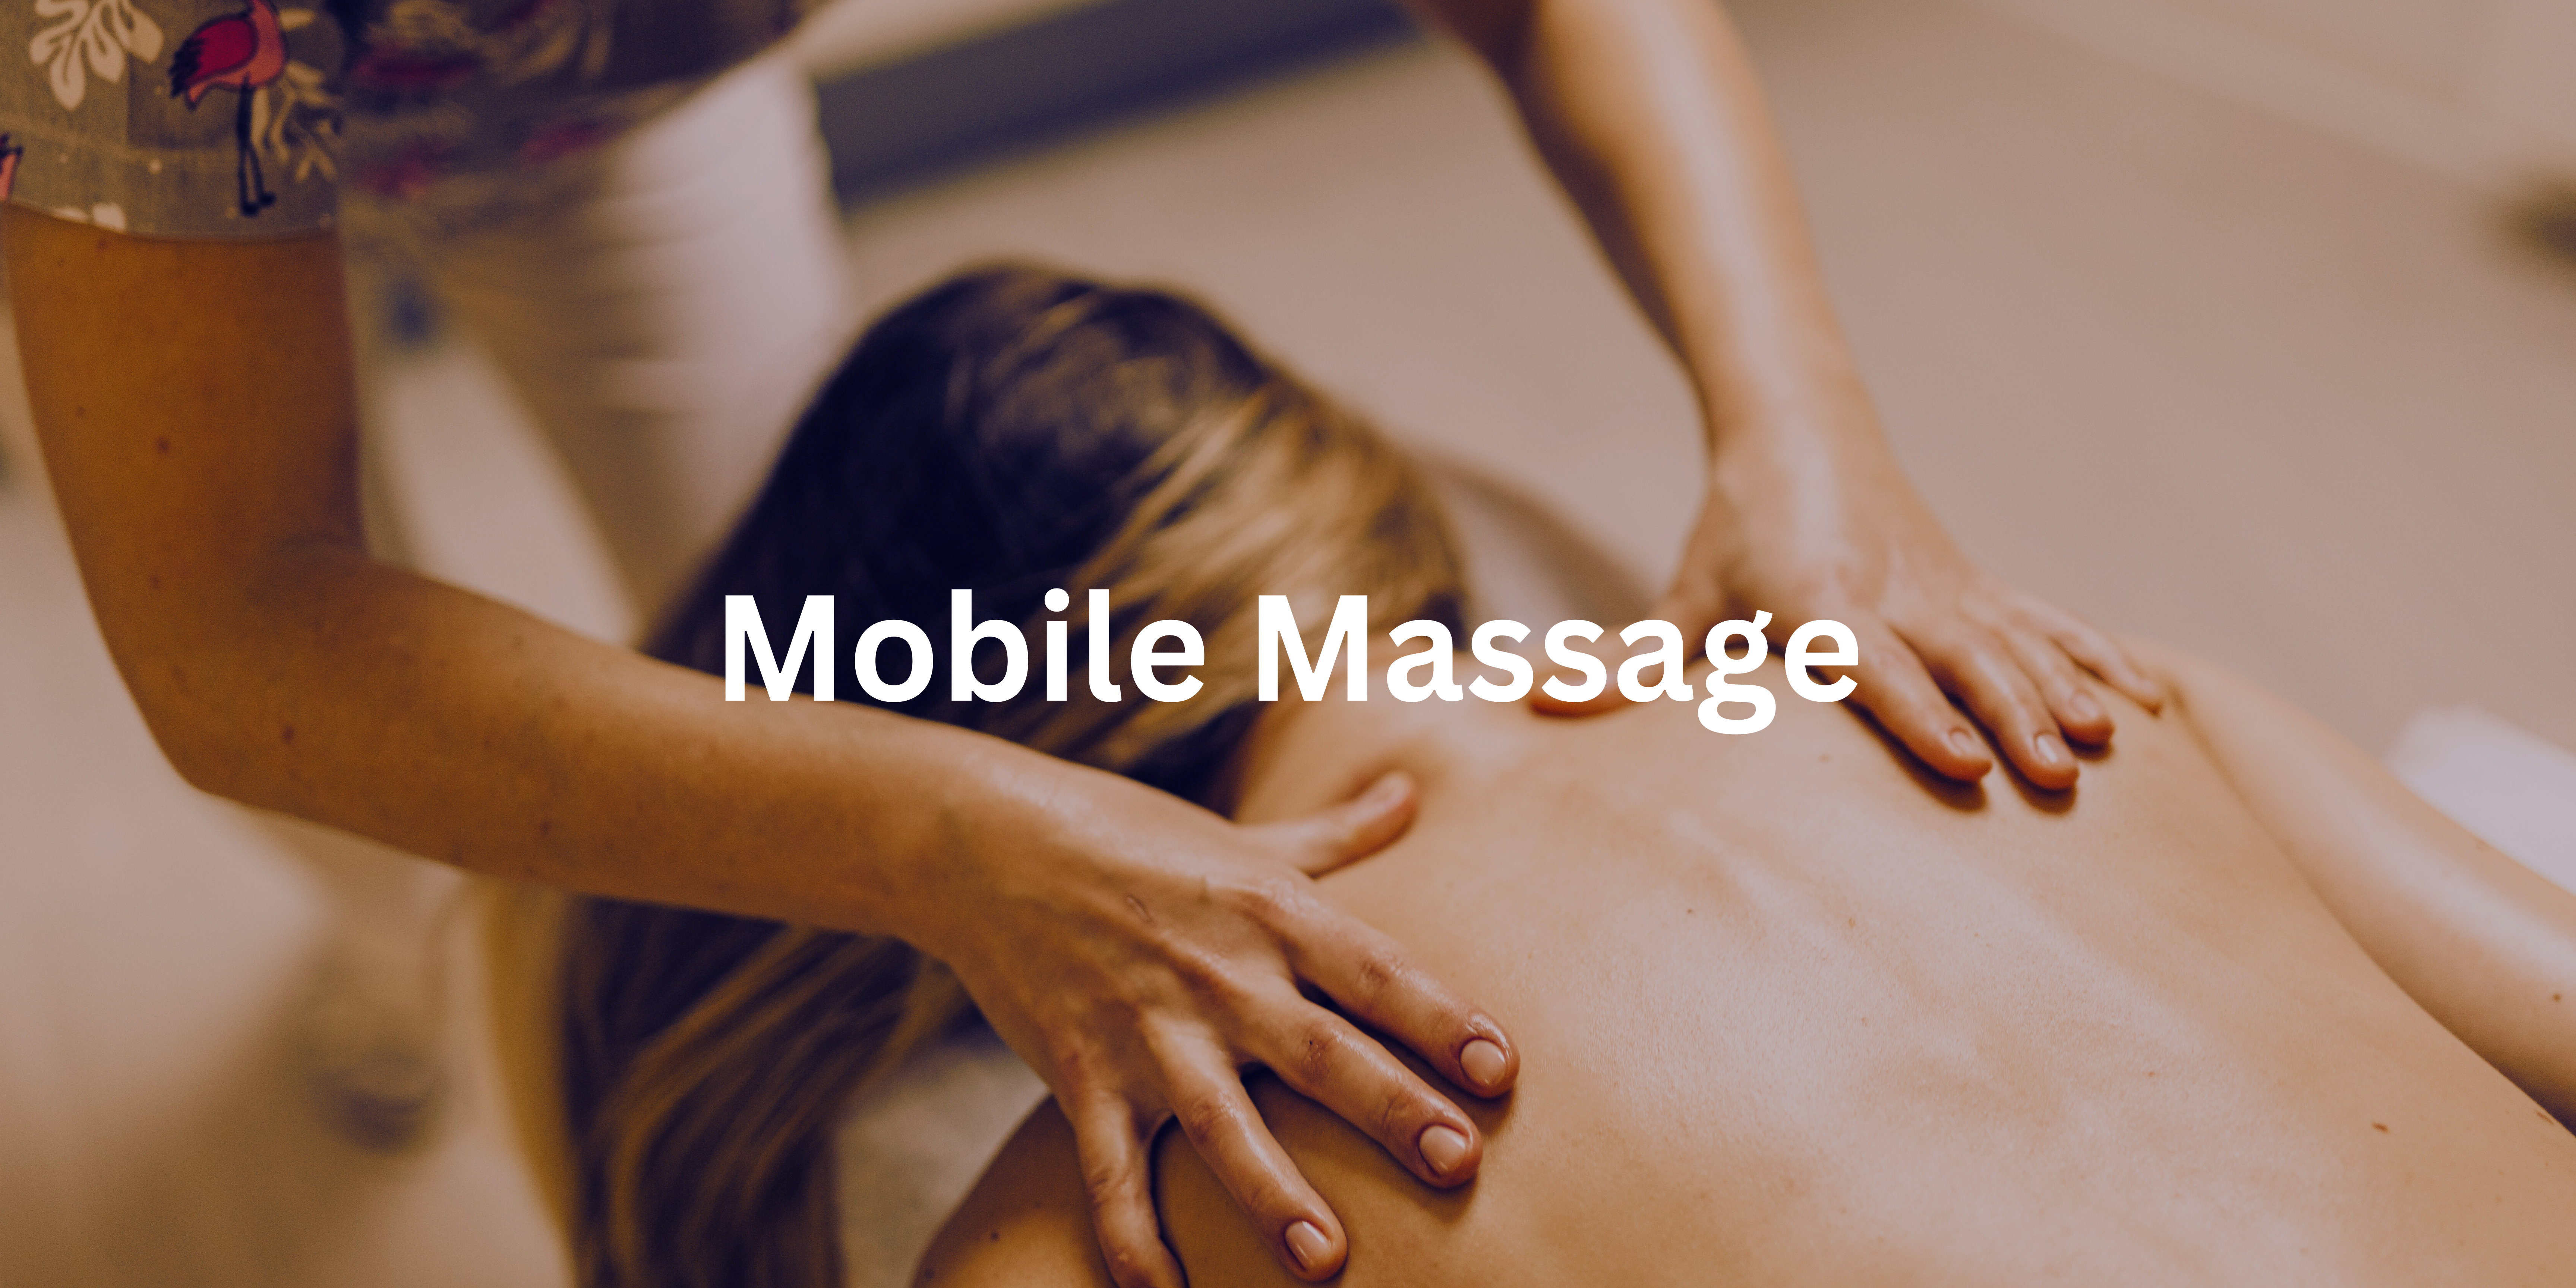 Woman Getting a Massage with the Words Mobile Massage